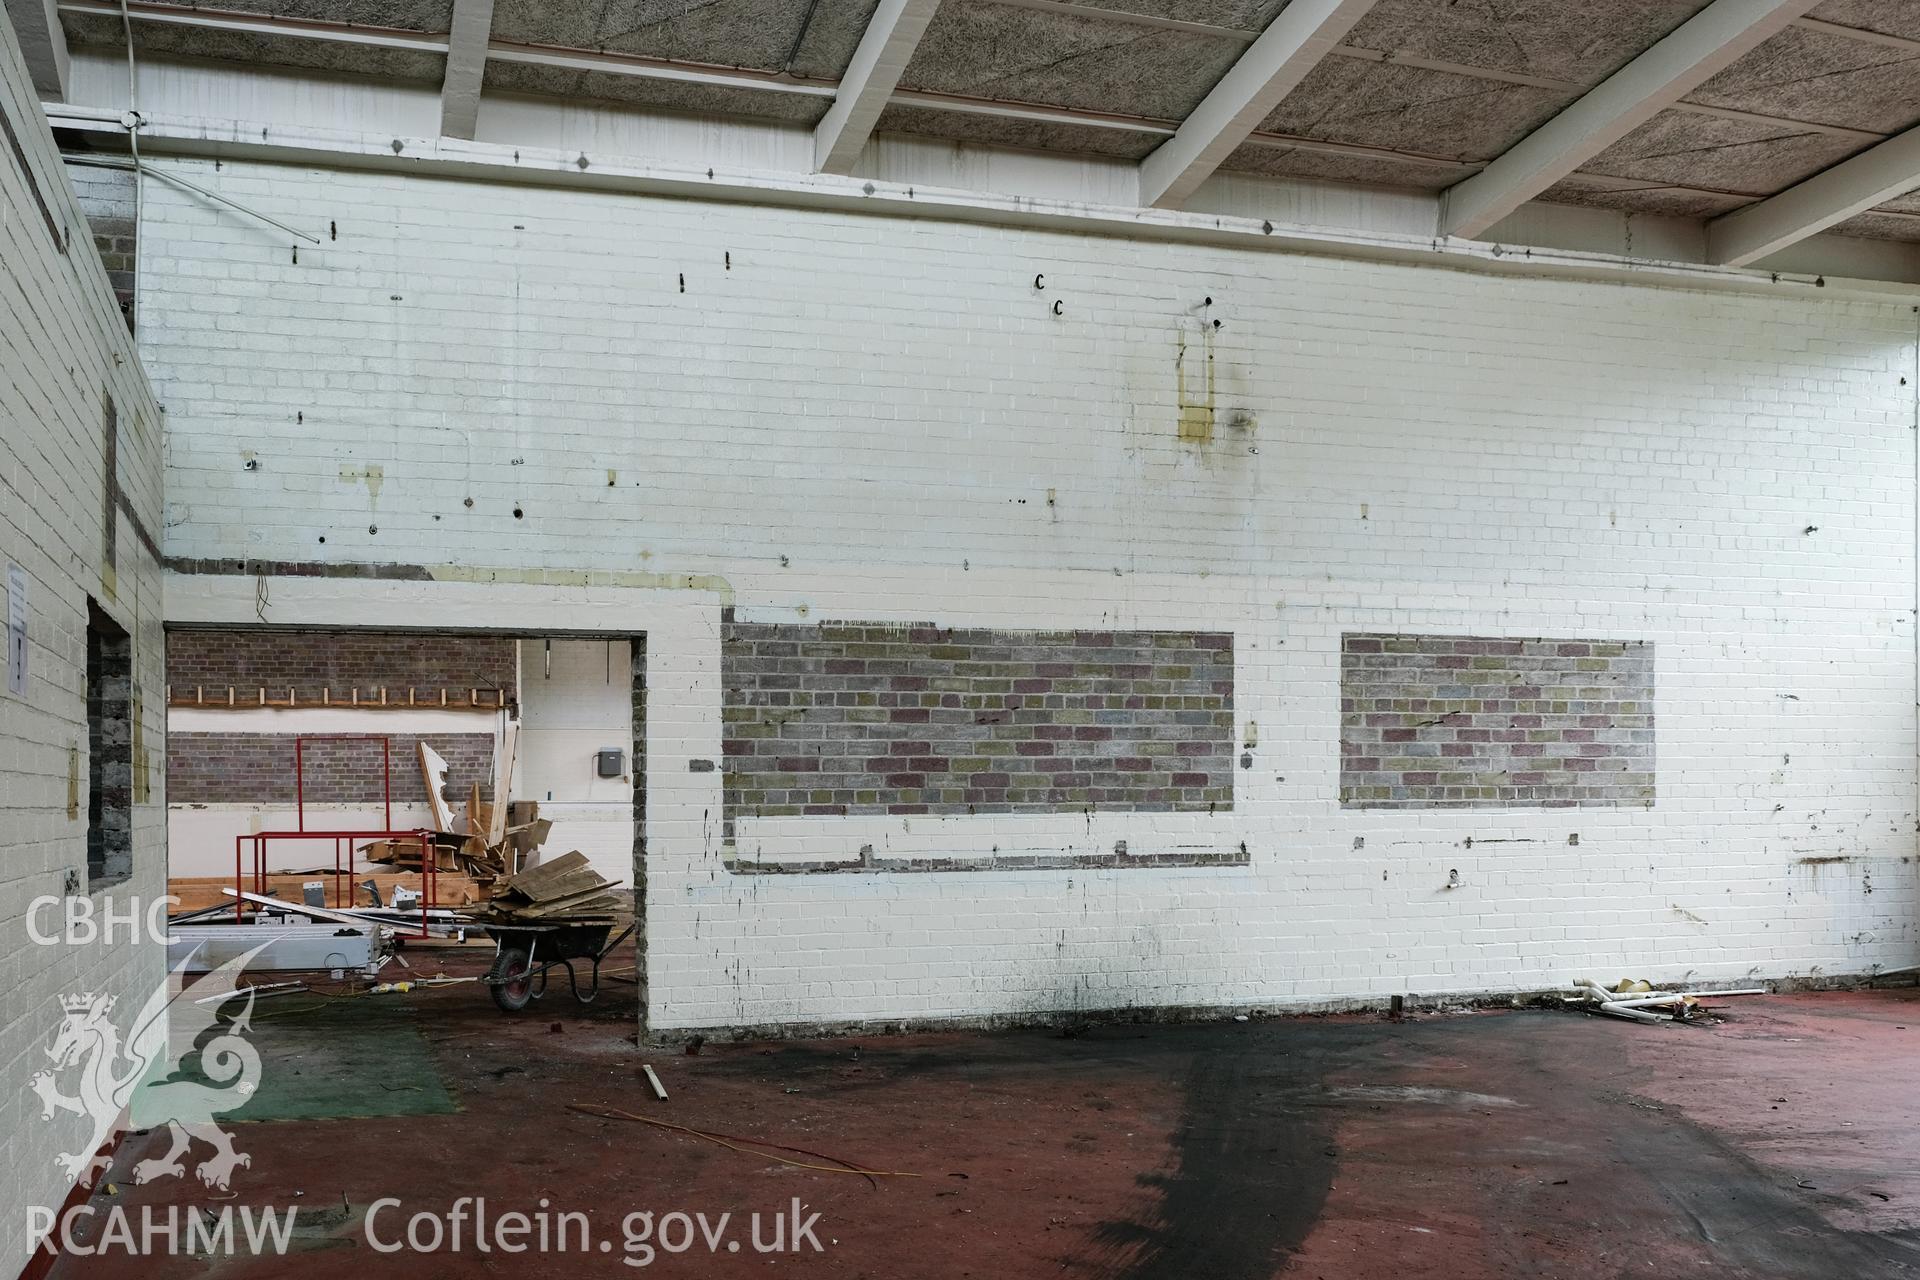 Digital colour photograph showing detailed interior view of classrooms at Caernarfonshire Technical College, Ffriddoedd Road, Bangor. Photographed by Dilys Morgan and donated by Wyn Thomas of Grwp Llandrillo-Menai Further Education College, 2019.